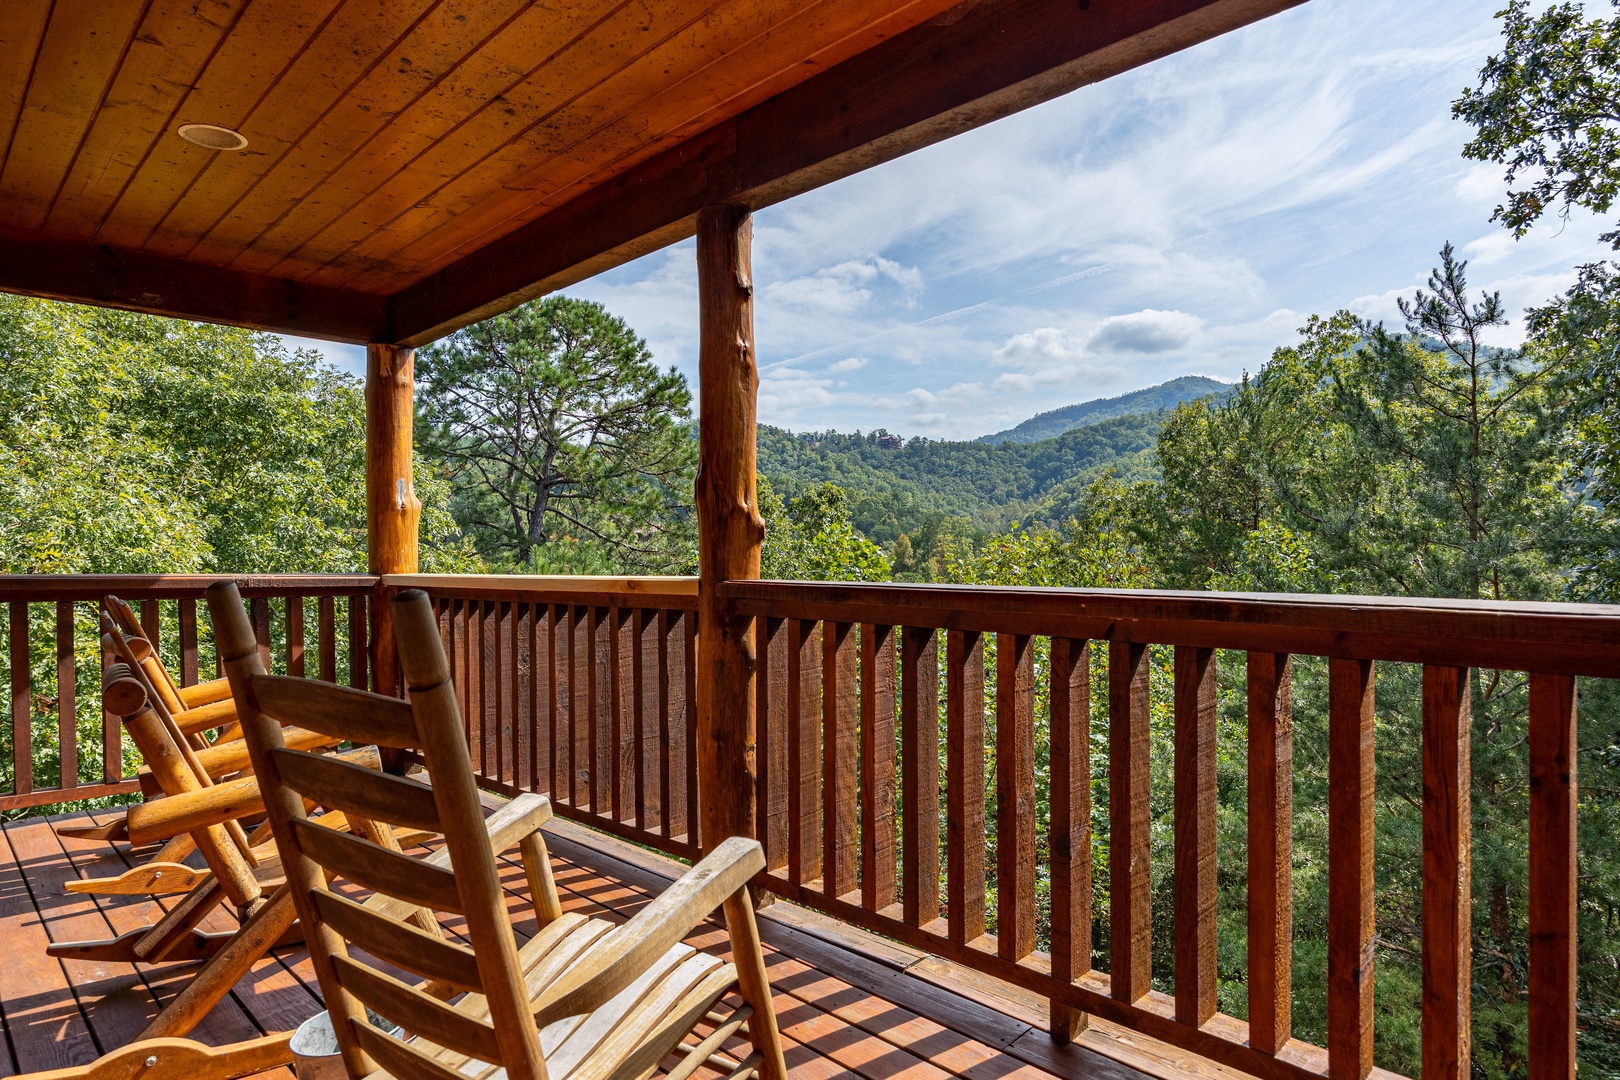 Deck seating with mountain view at The Great Outdoors, a 3 bedroom cabin rental located in Pigeon Forge